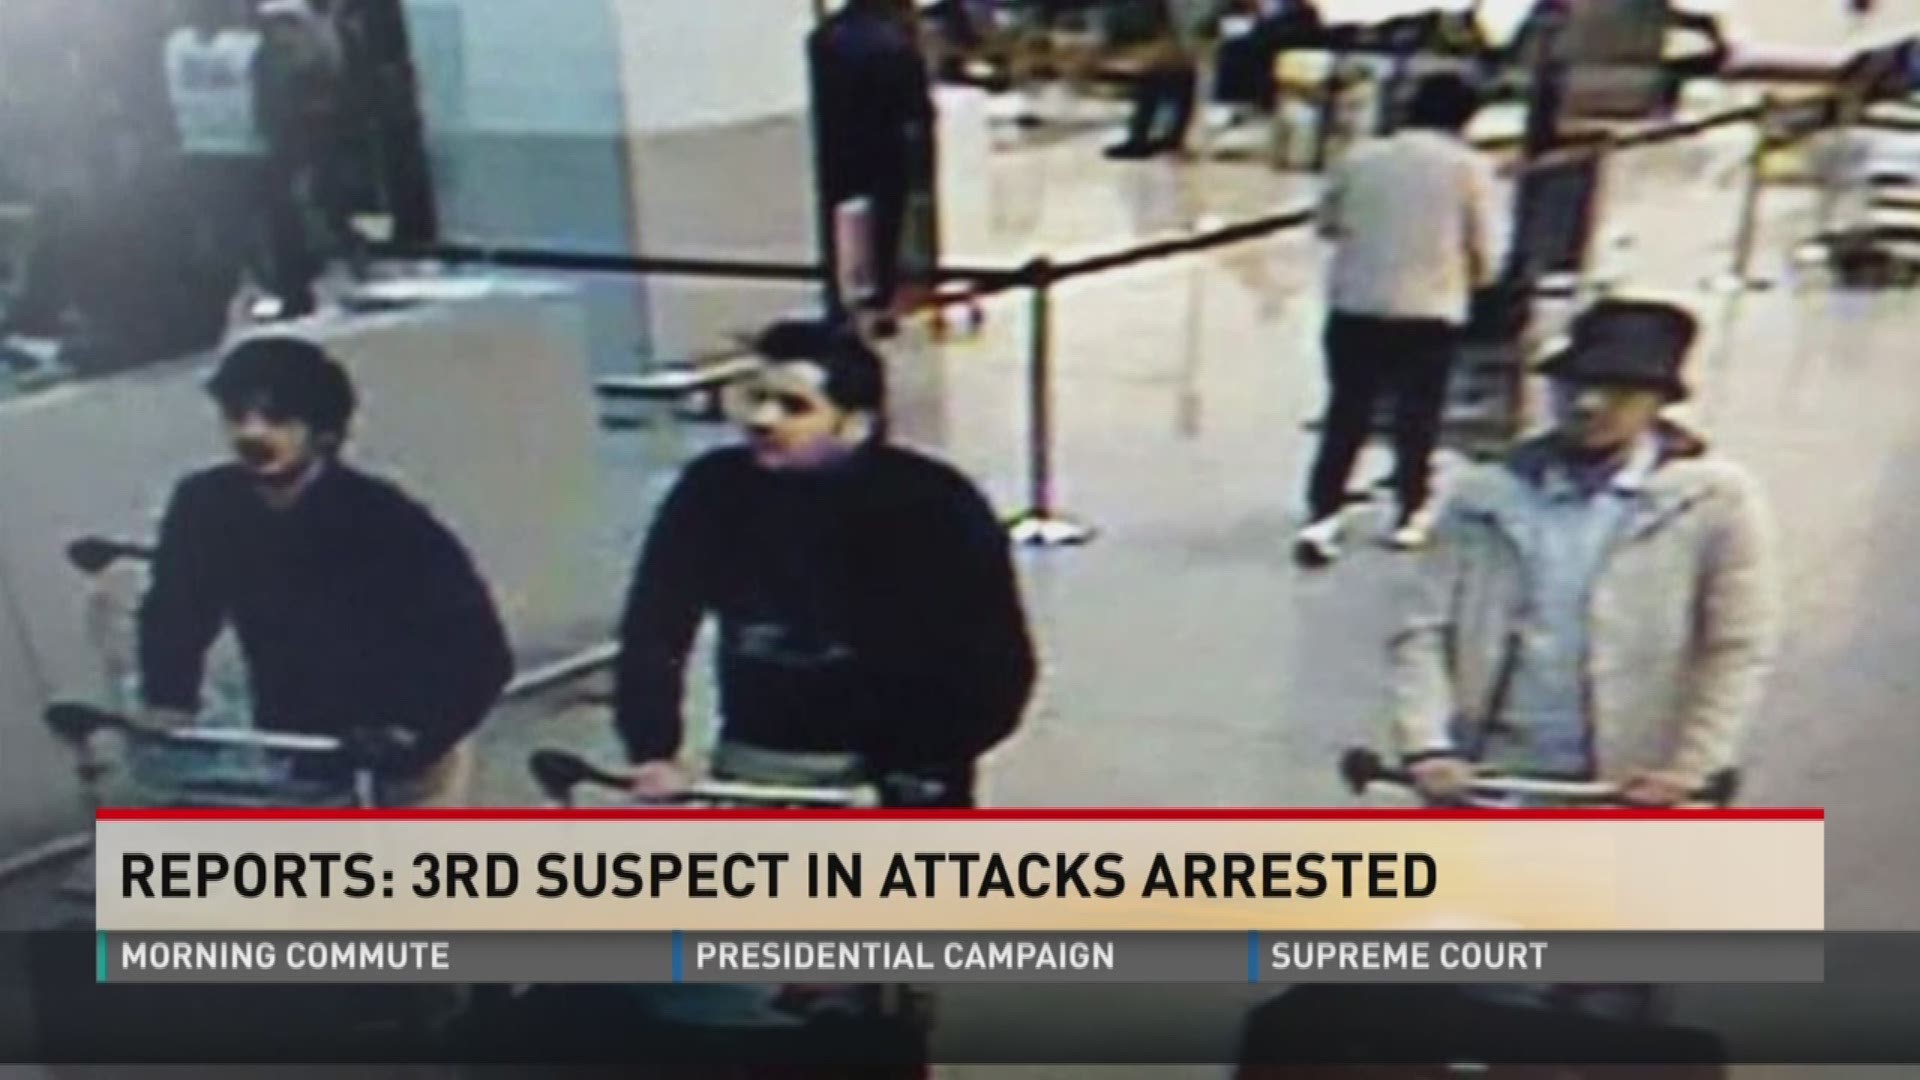 Belgian police arrested one of the suspects in the Brussels terror attacks that killed 34 people at the city's airport and at a metro station, according to media reports.